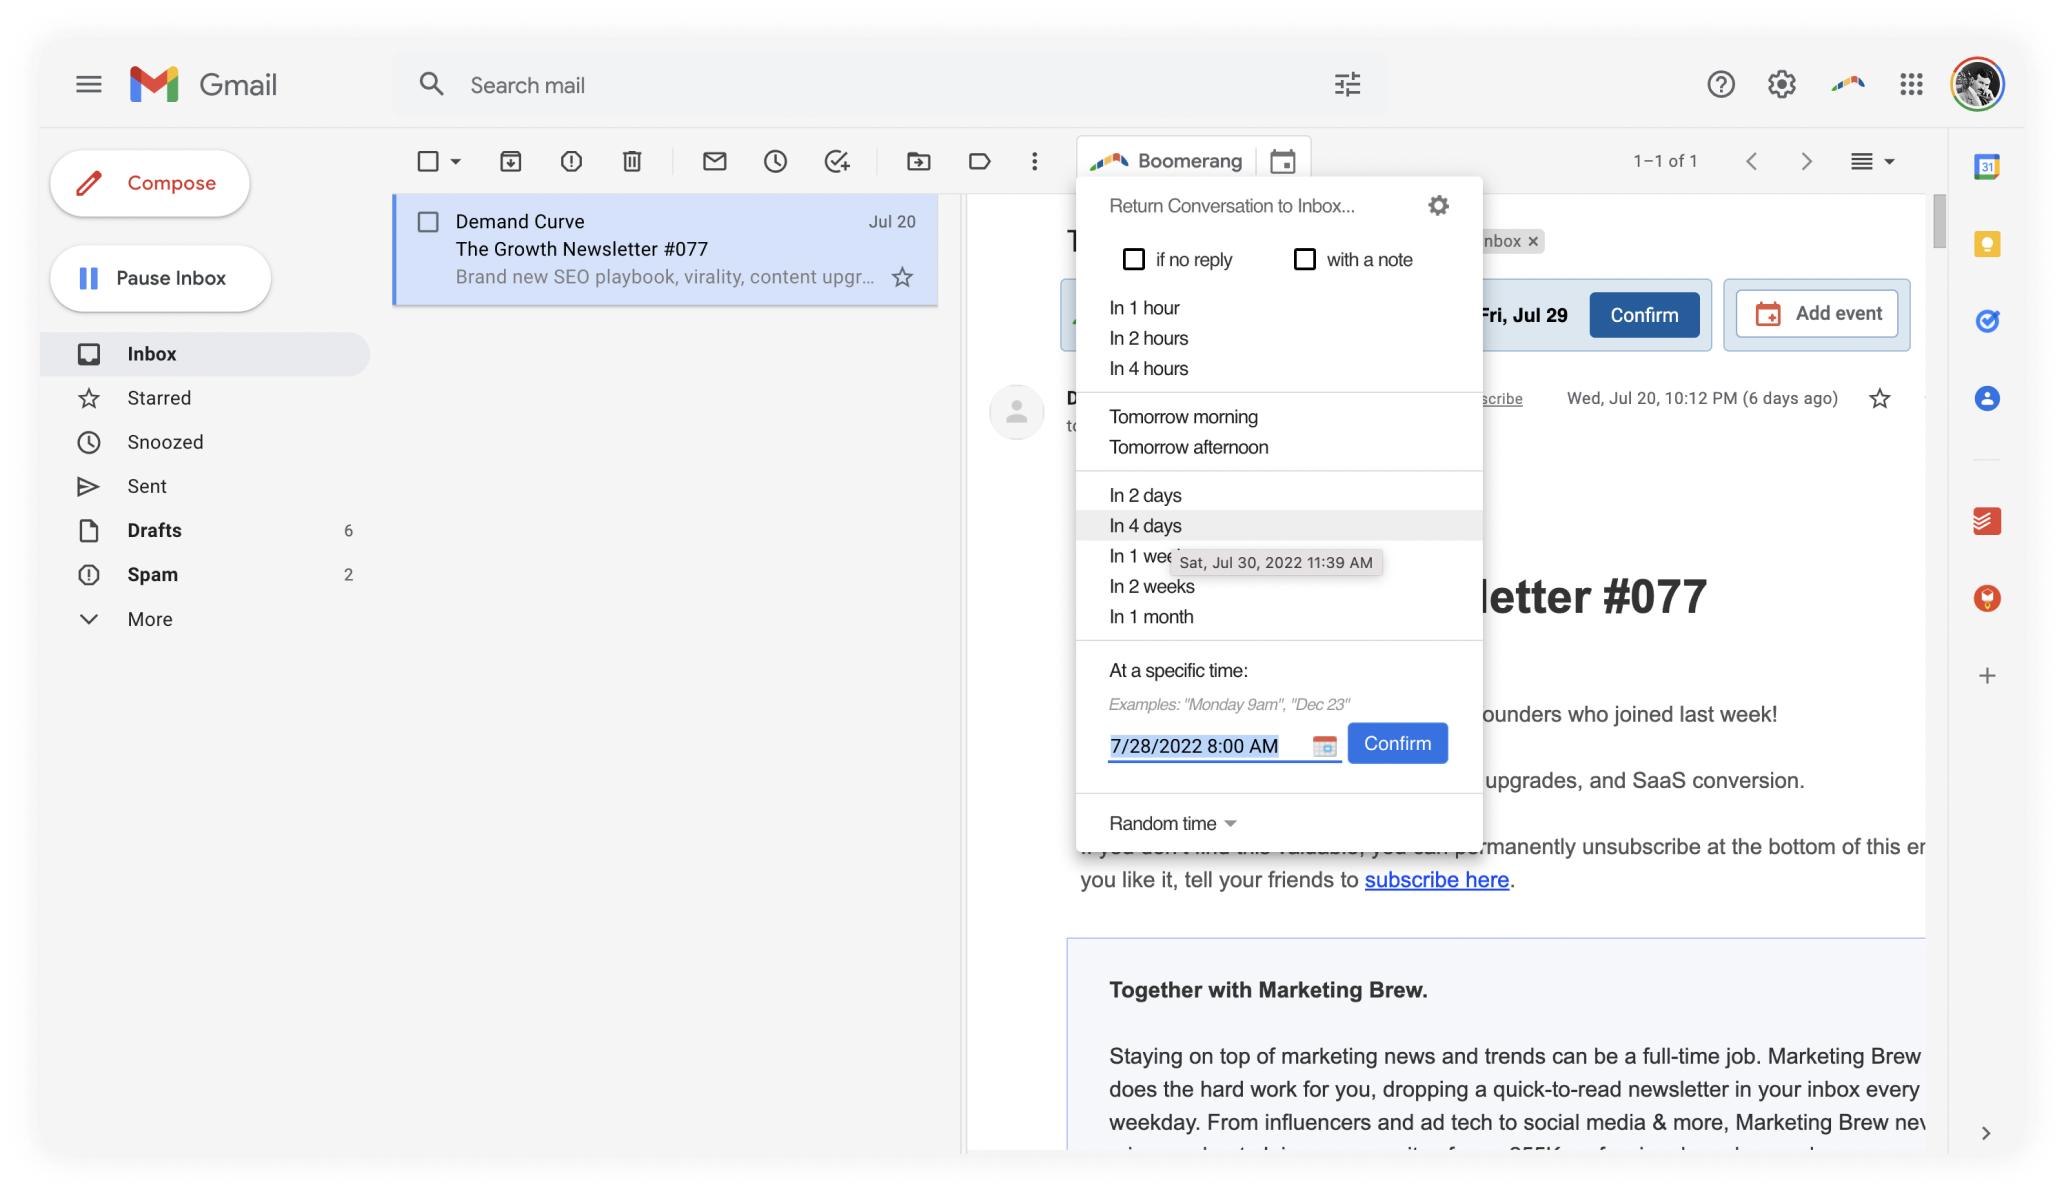 Boomerang is a Gmail extension